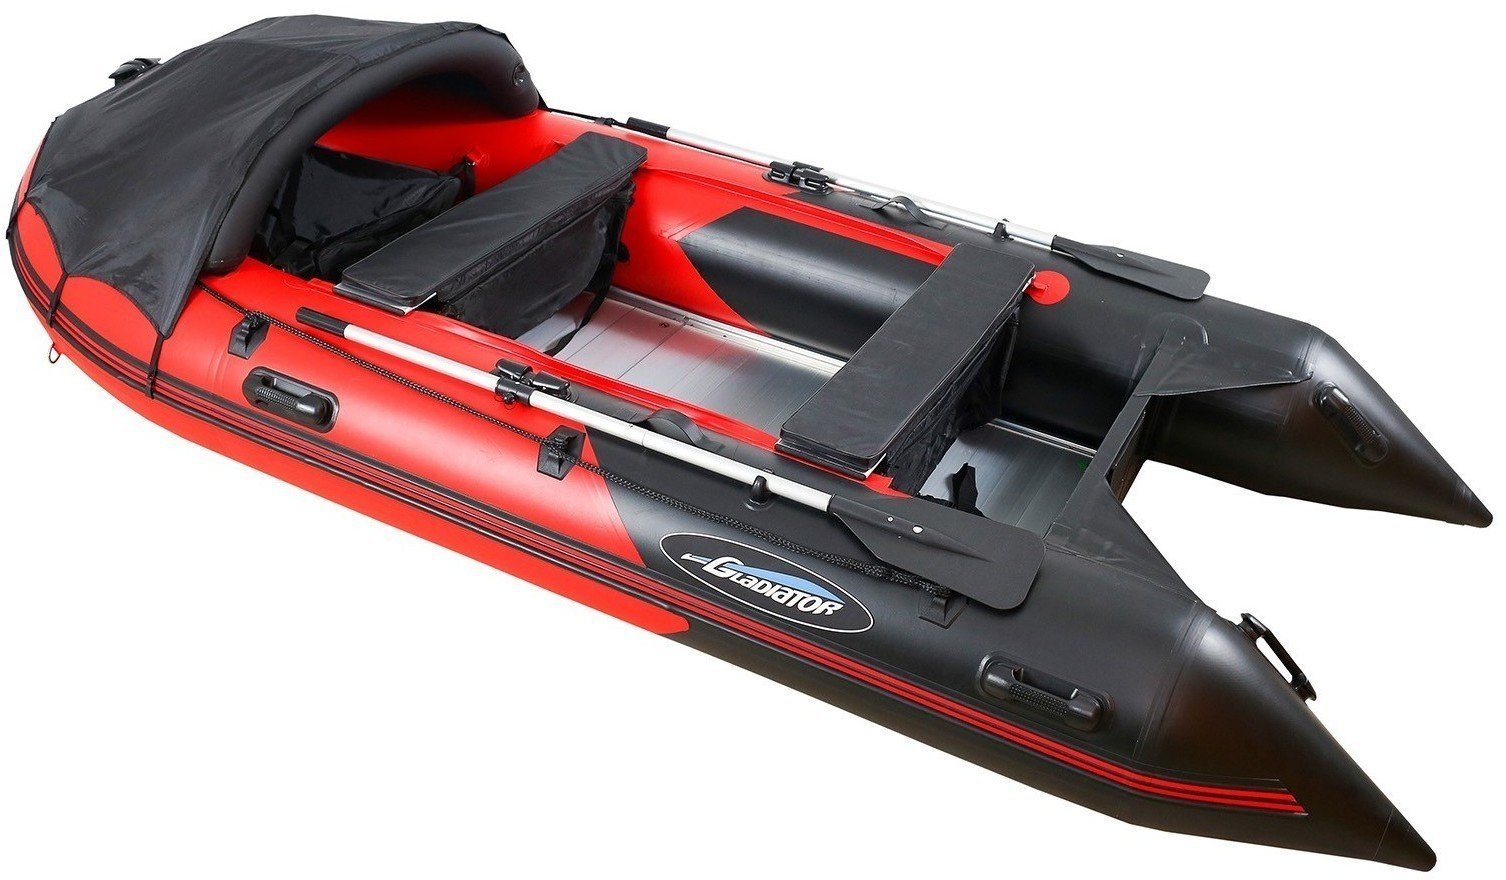 Bote inflable Gladiator Bote inflable C420AL 2022 420 cm Red-Negro